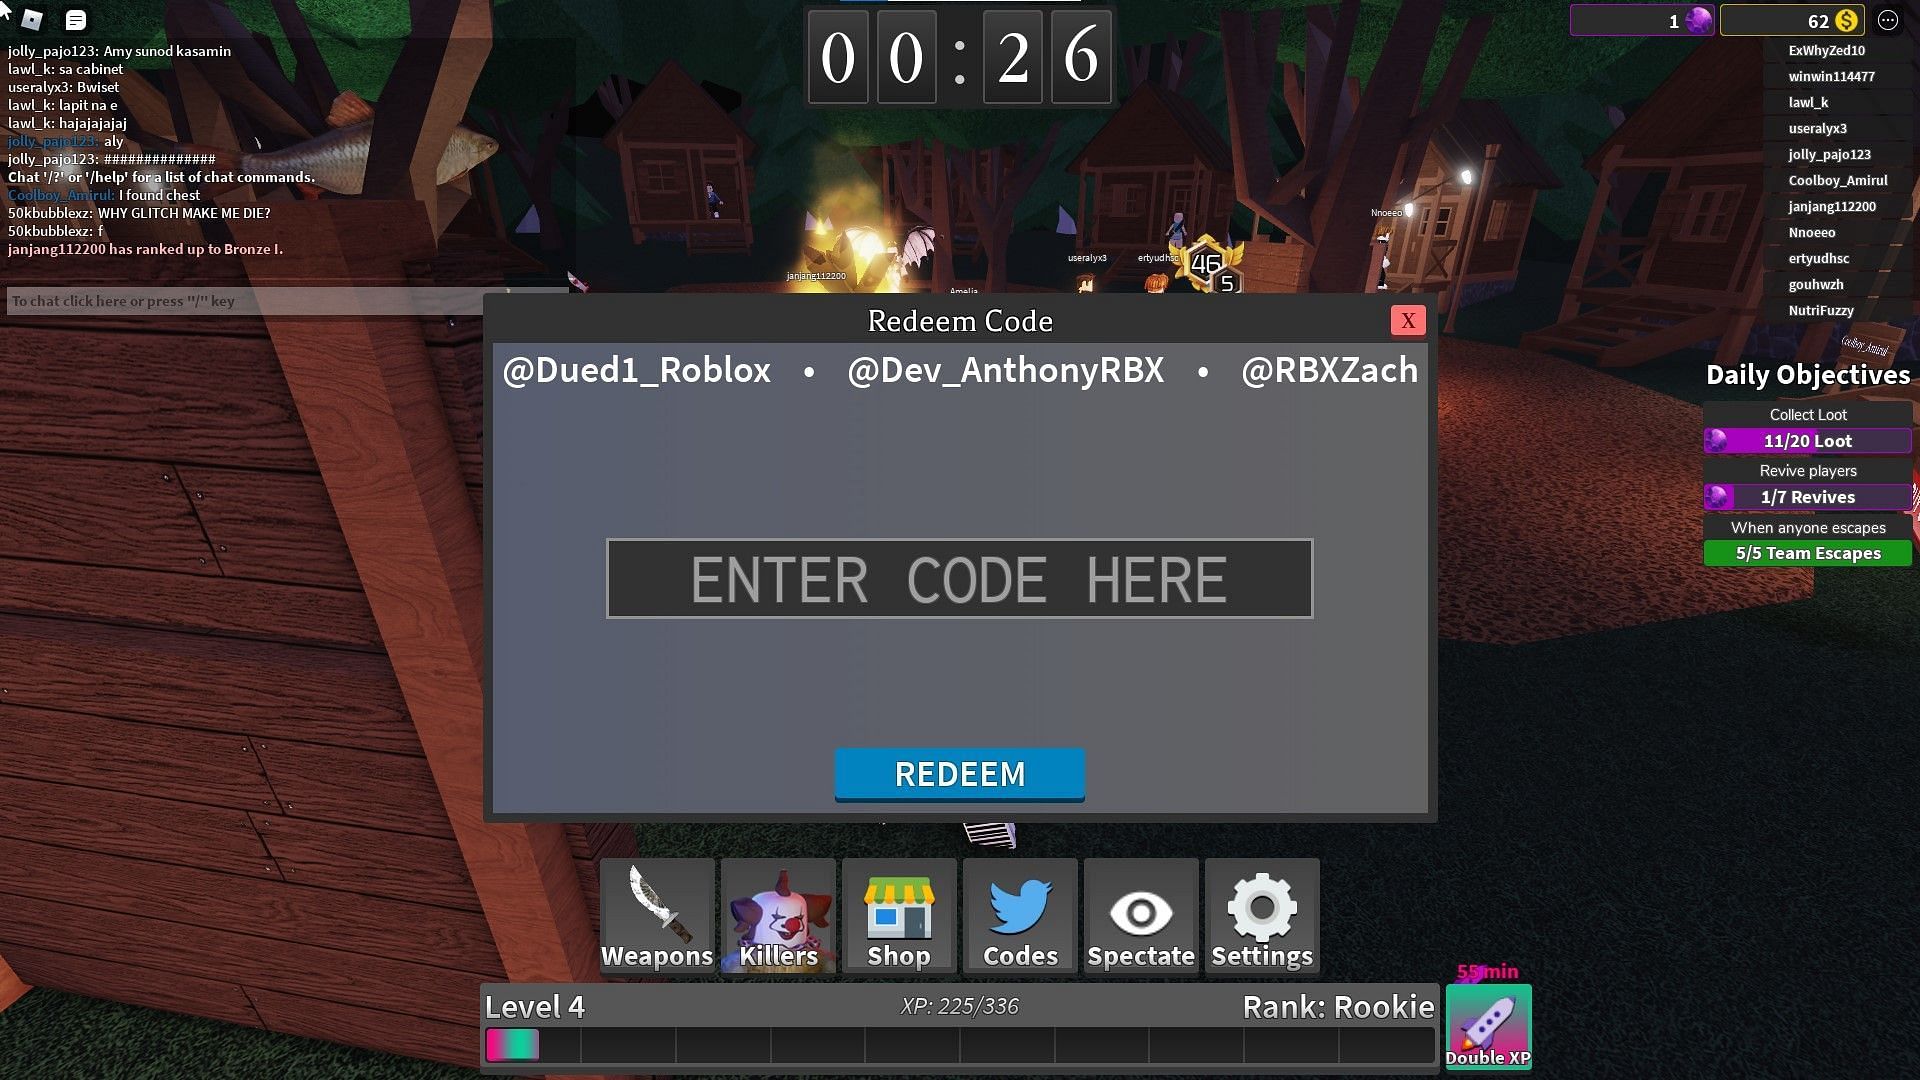 In this text box, players will have to carefully enter the codes (Image via Roblox)